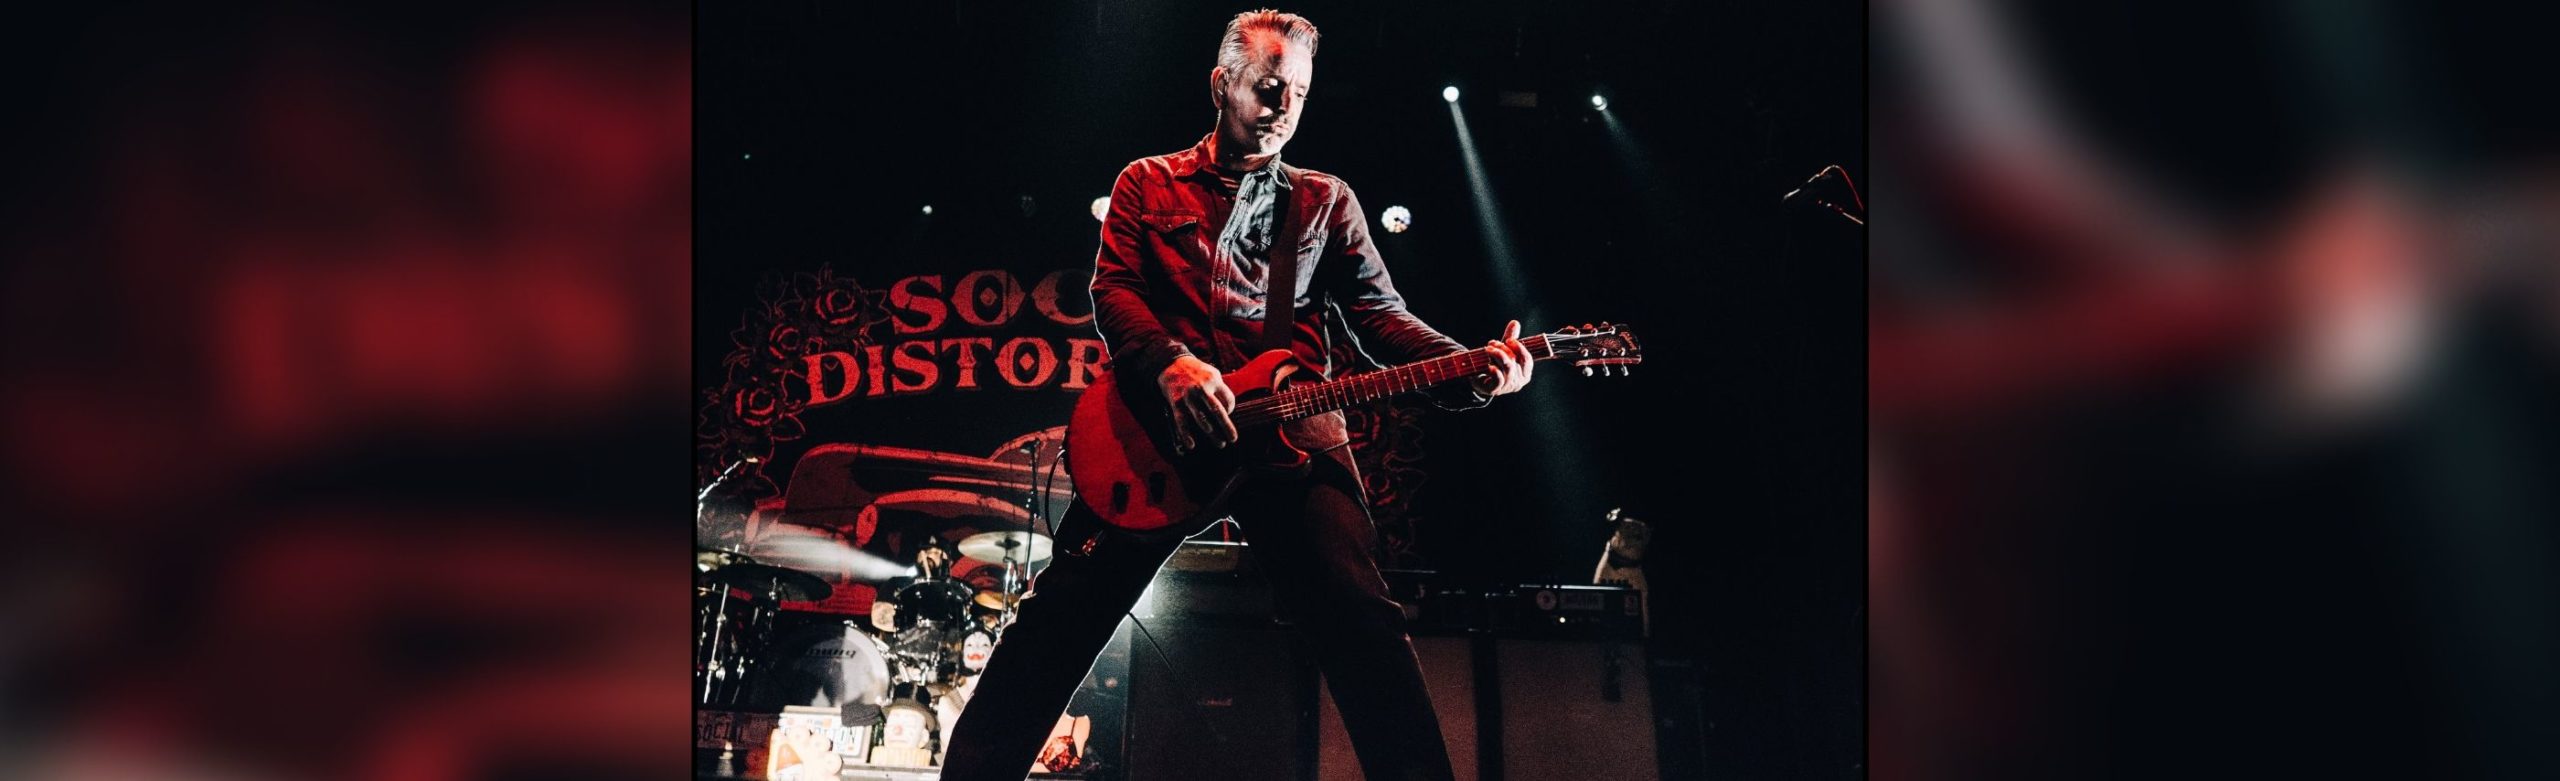 Social Distortion + Merchandise Package Giveaway Image